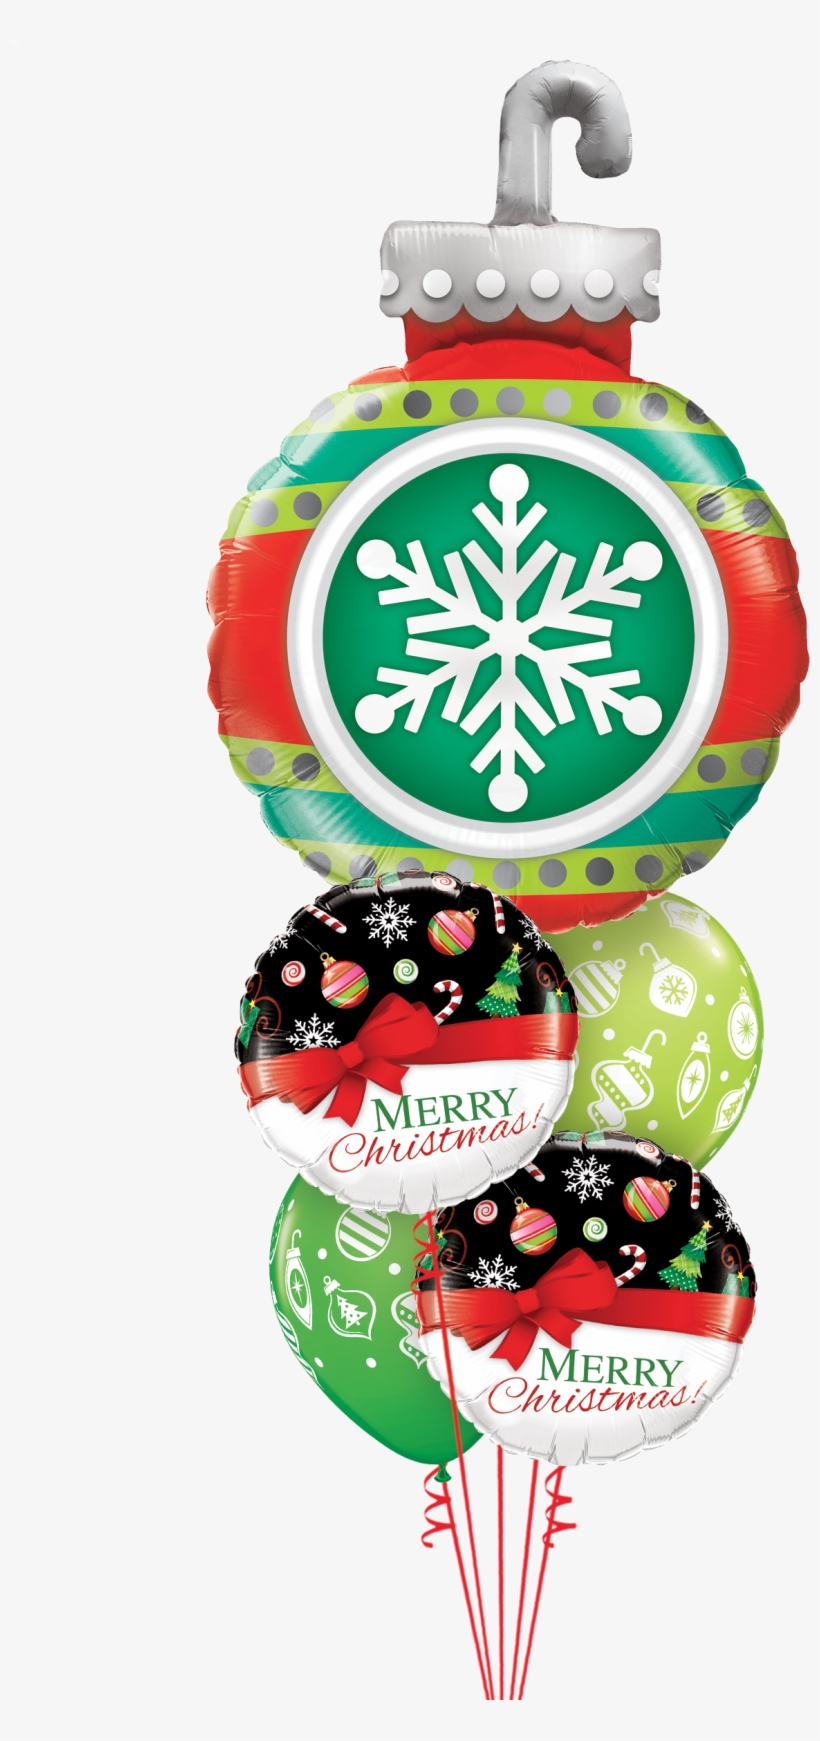 Christmas Balloons - Inflated Personalised Christmas Bauble Foil Balloons, transparent png #3648125